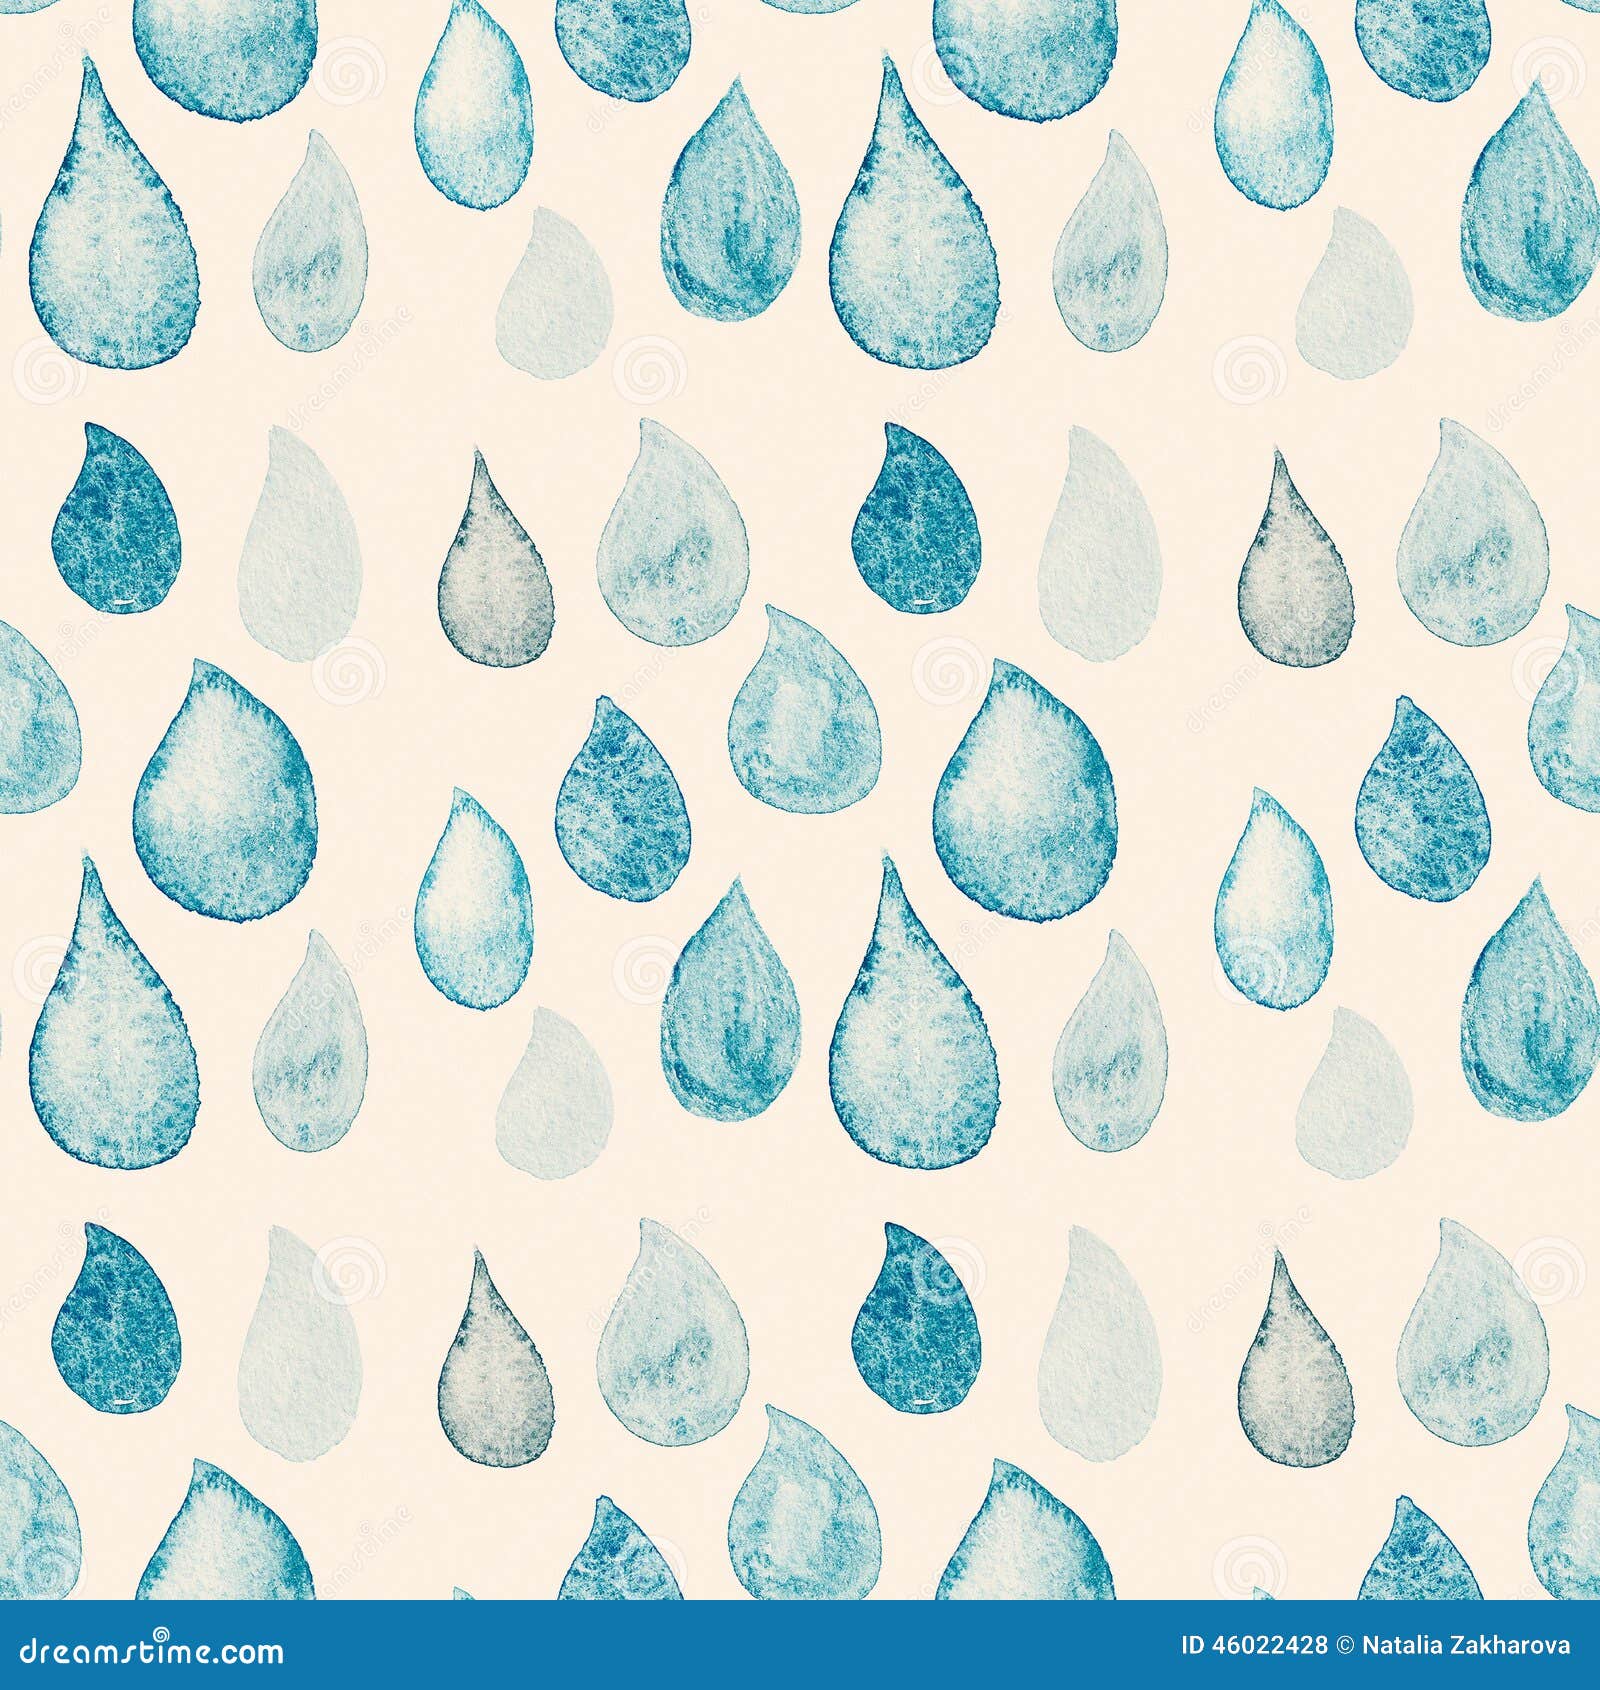 patterns tumblr wallpapers desktop With Watercolor Pattern Blue Drops Seamless Abstract Rain